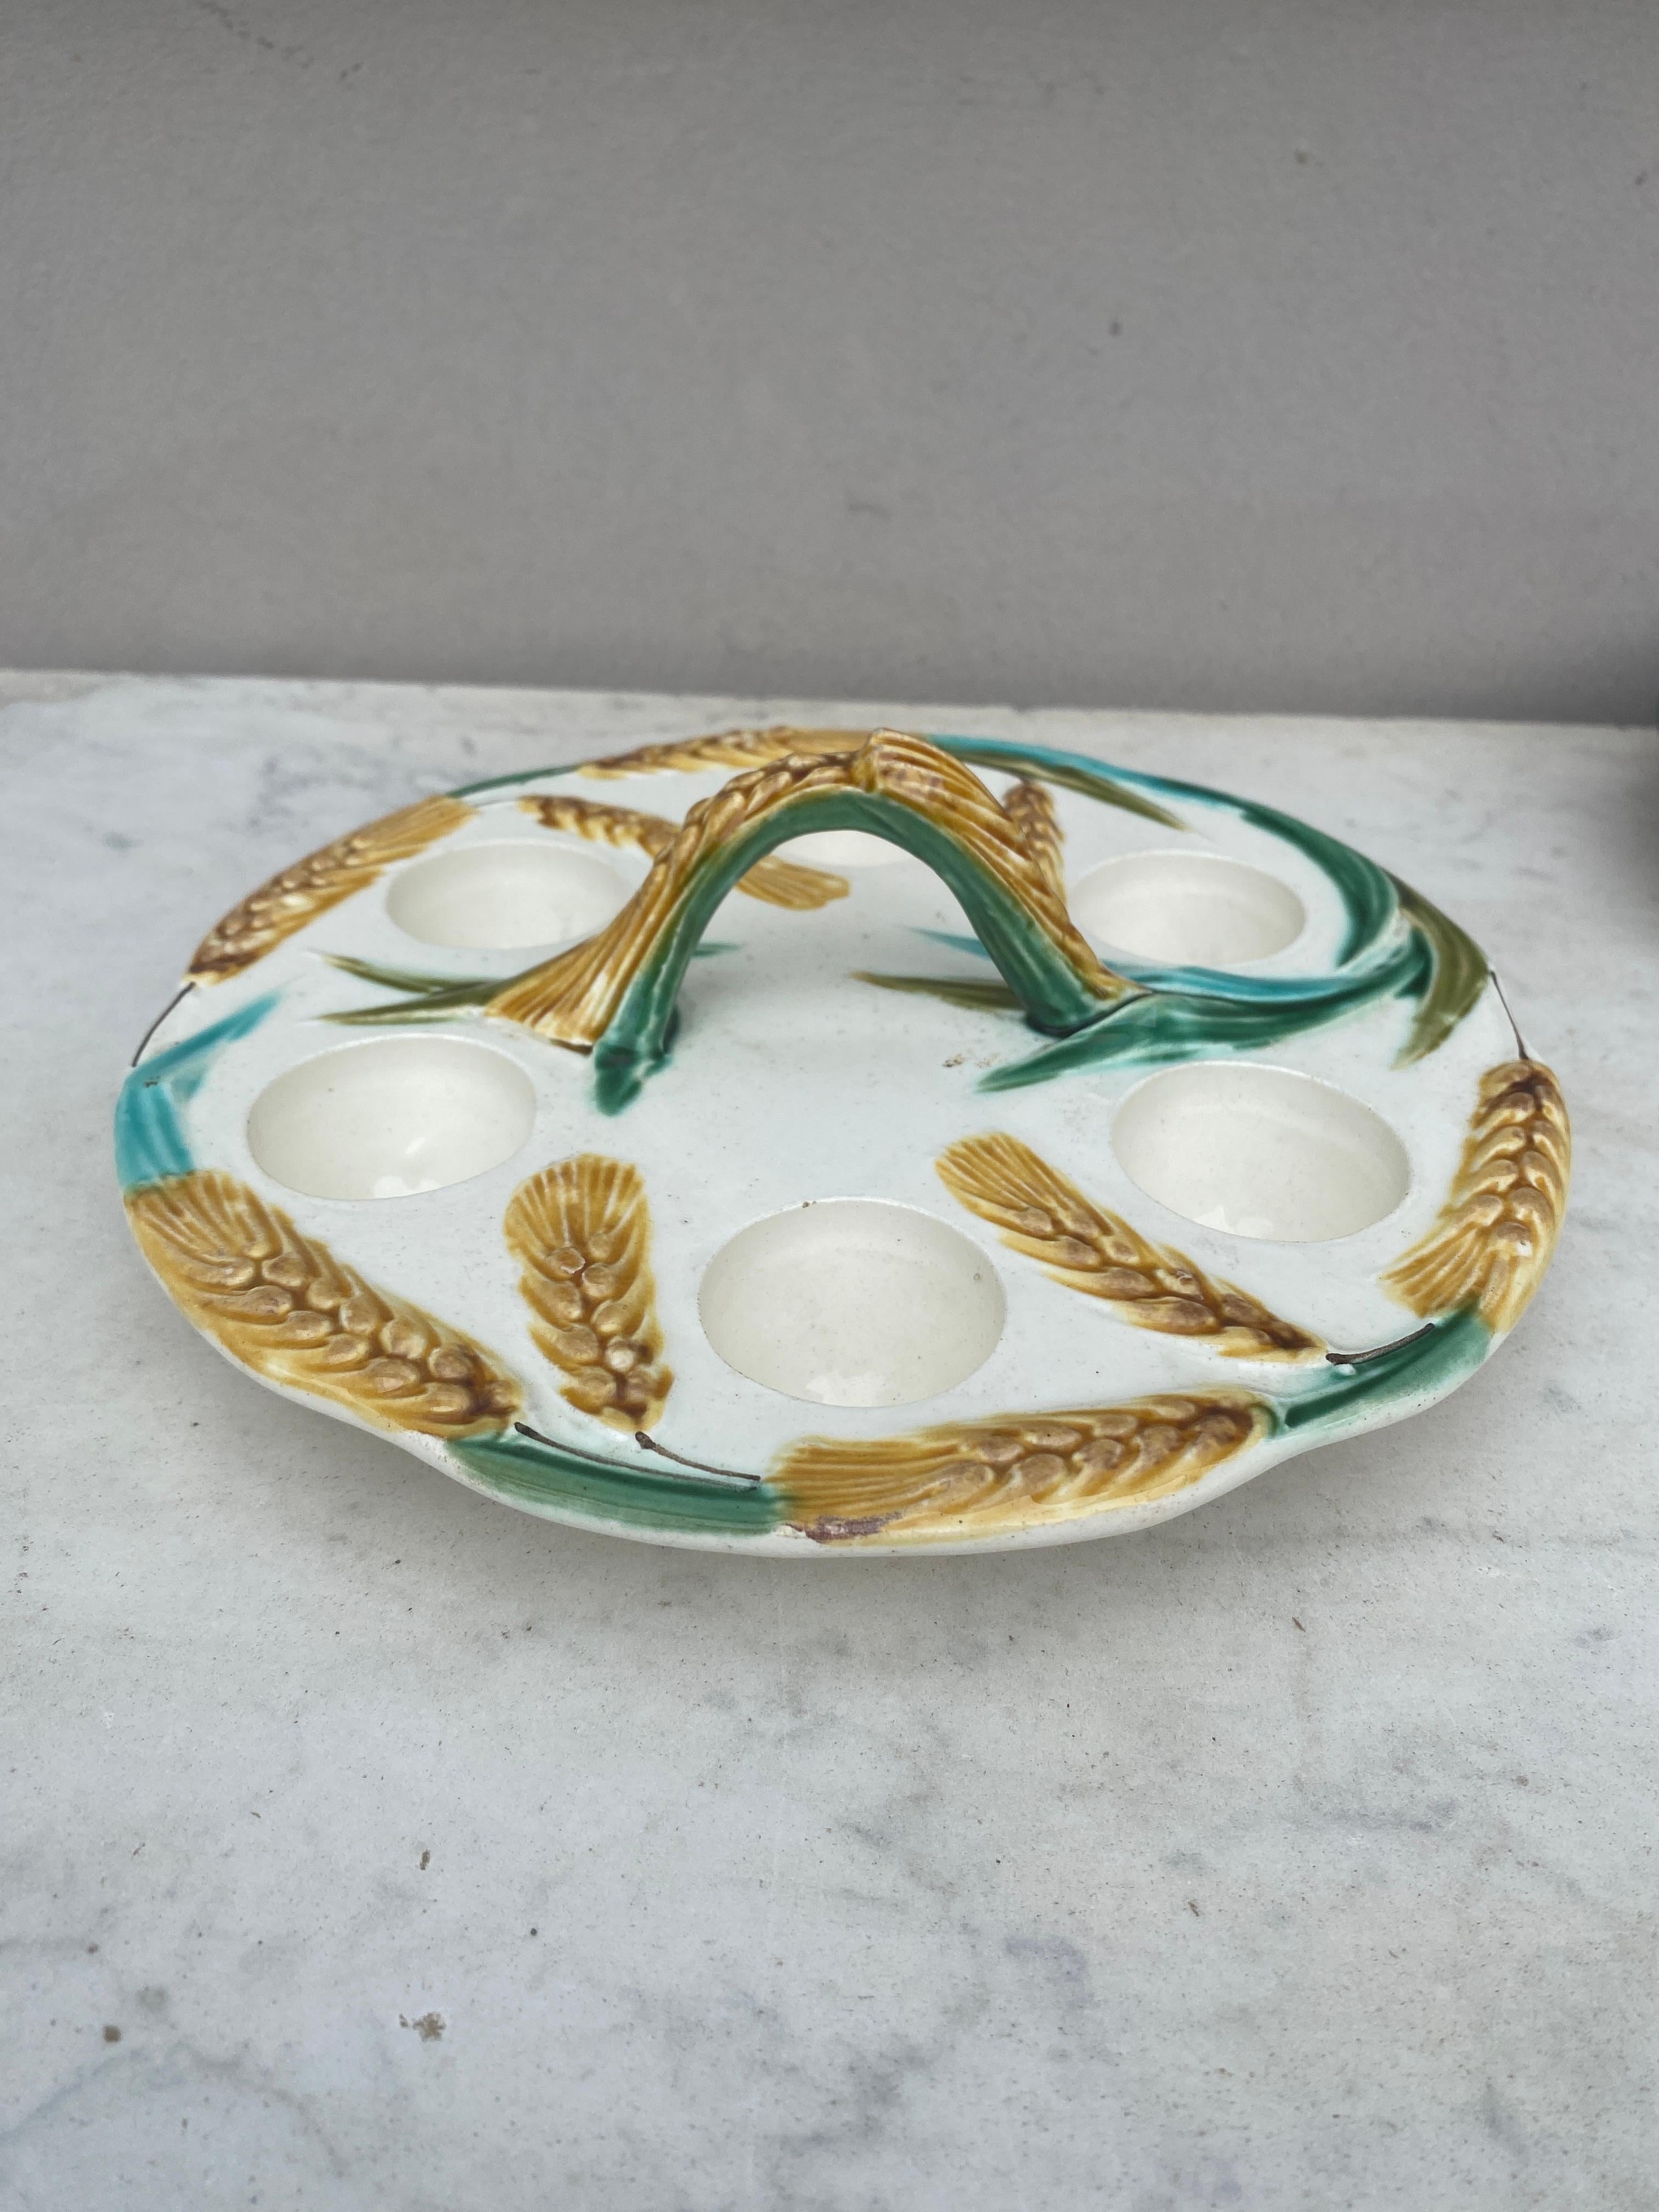 Antique French Majolica wheat egg plate with handle, circa 1900.